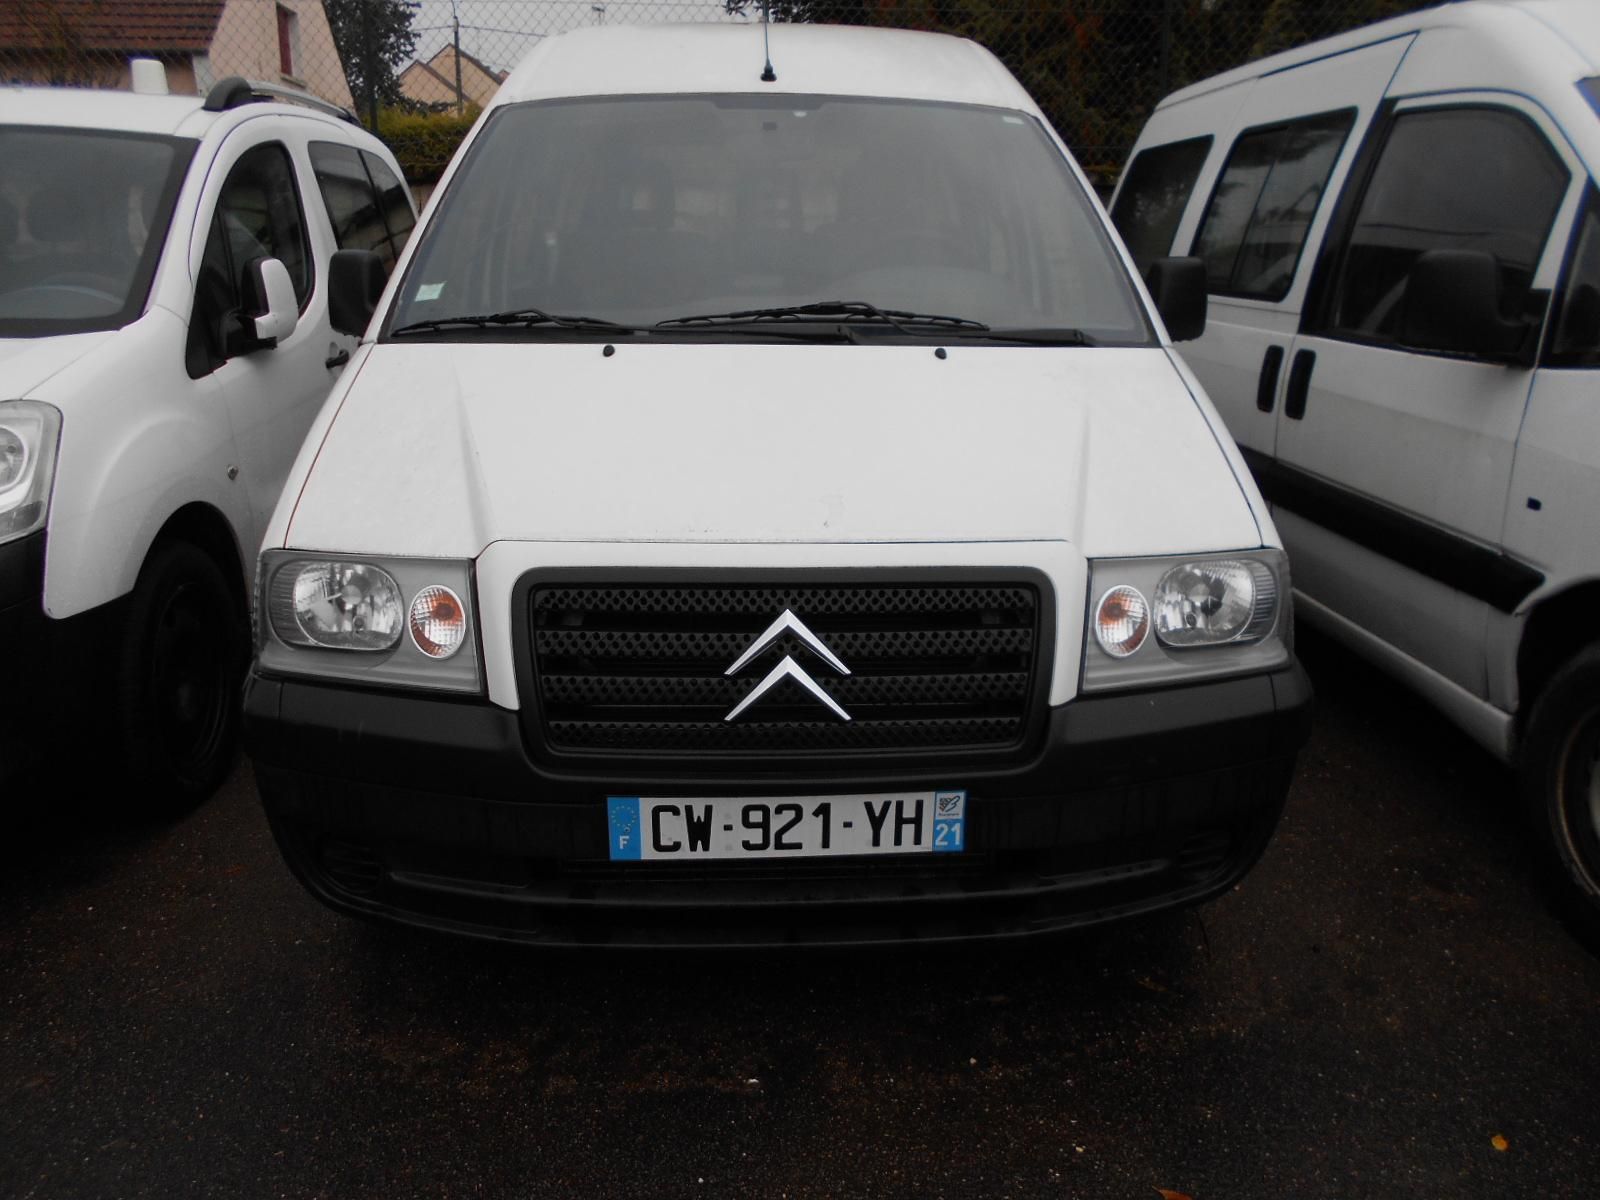 Null [RP] Reserved for Professionals.

CITROEN Jumpy Gazole, imm CW-921-YH, type&hellip;